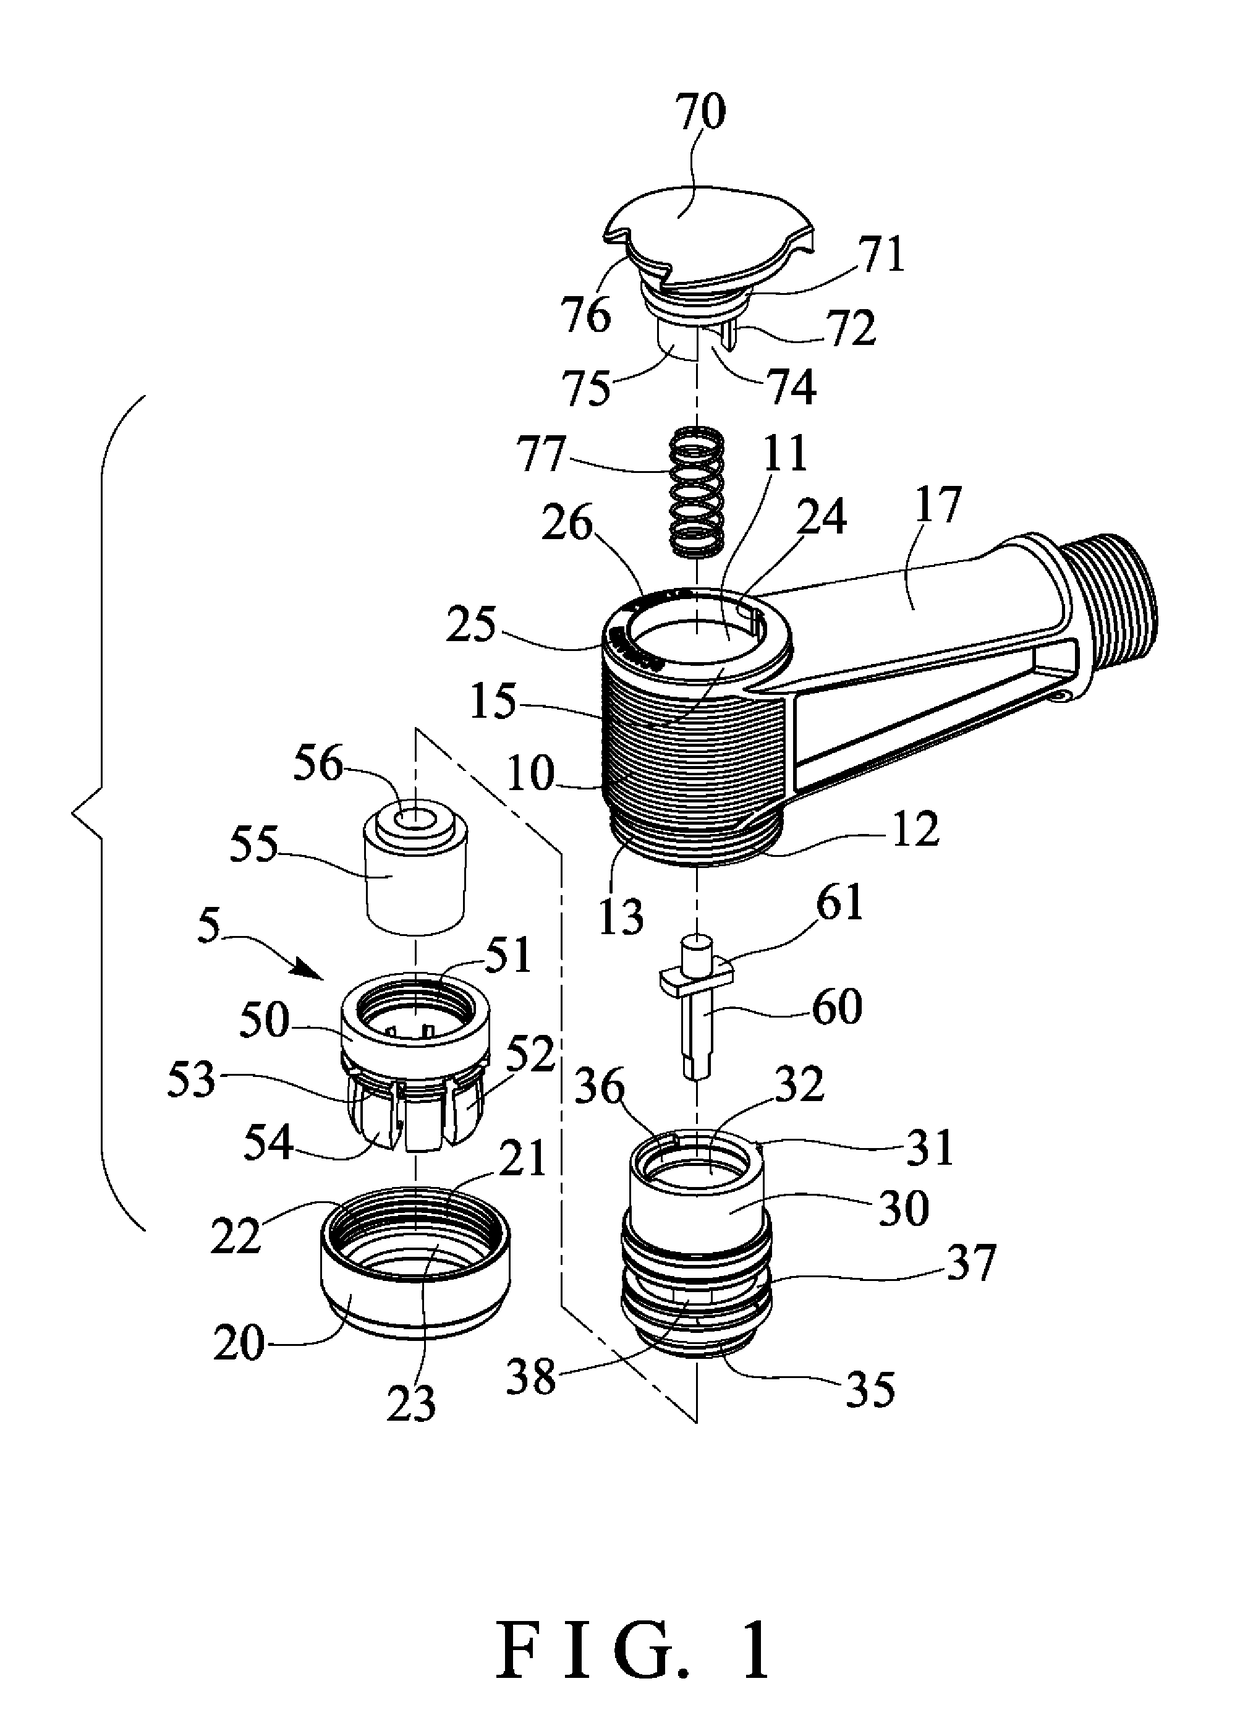 Air valve connecting device having pivotal actuating knob